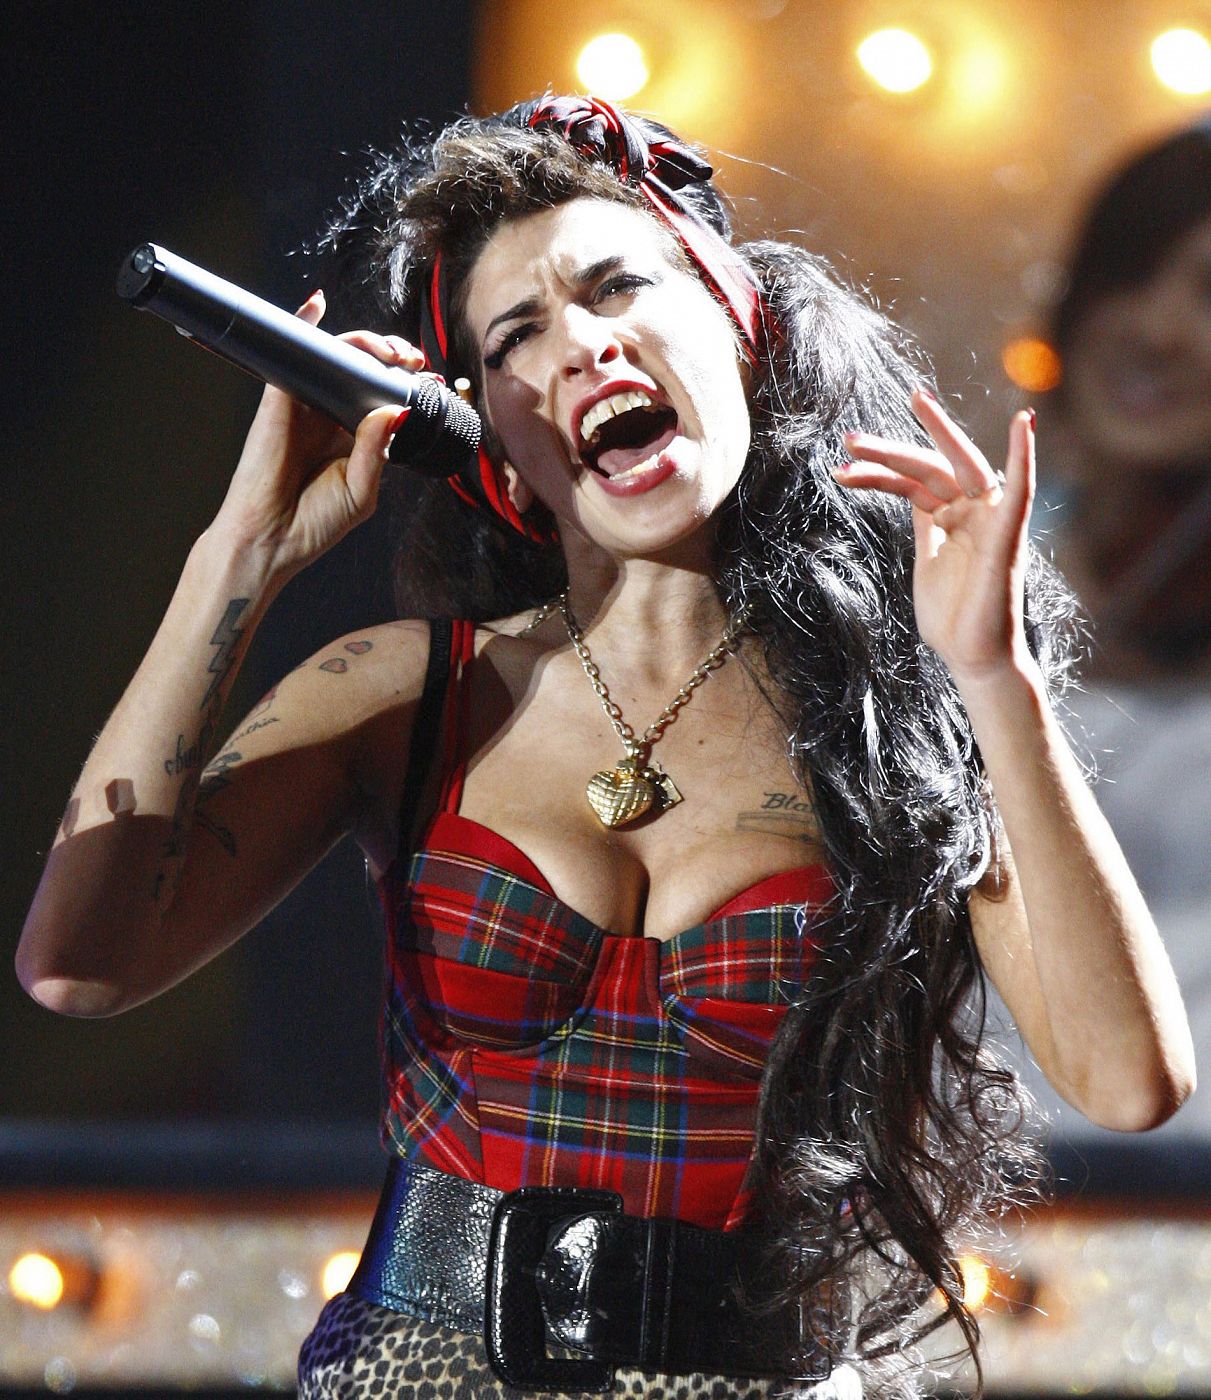 File photo of British singer Amy Winehouse performing at the Brit Awards at Earls Court in London